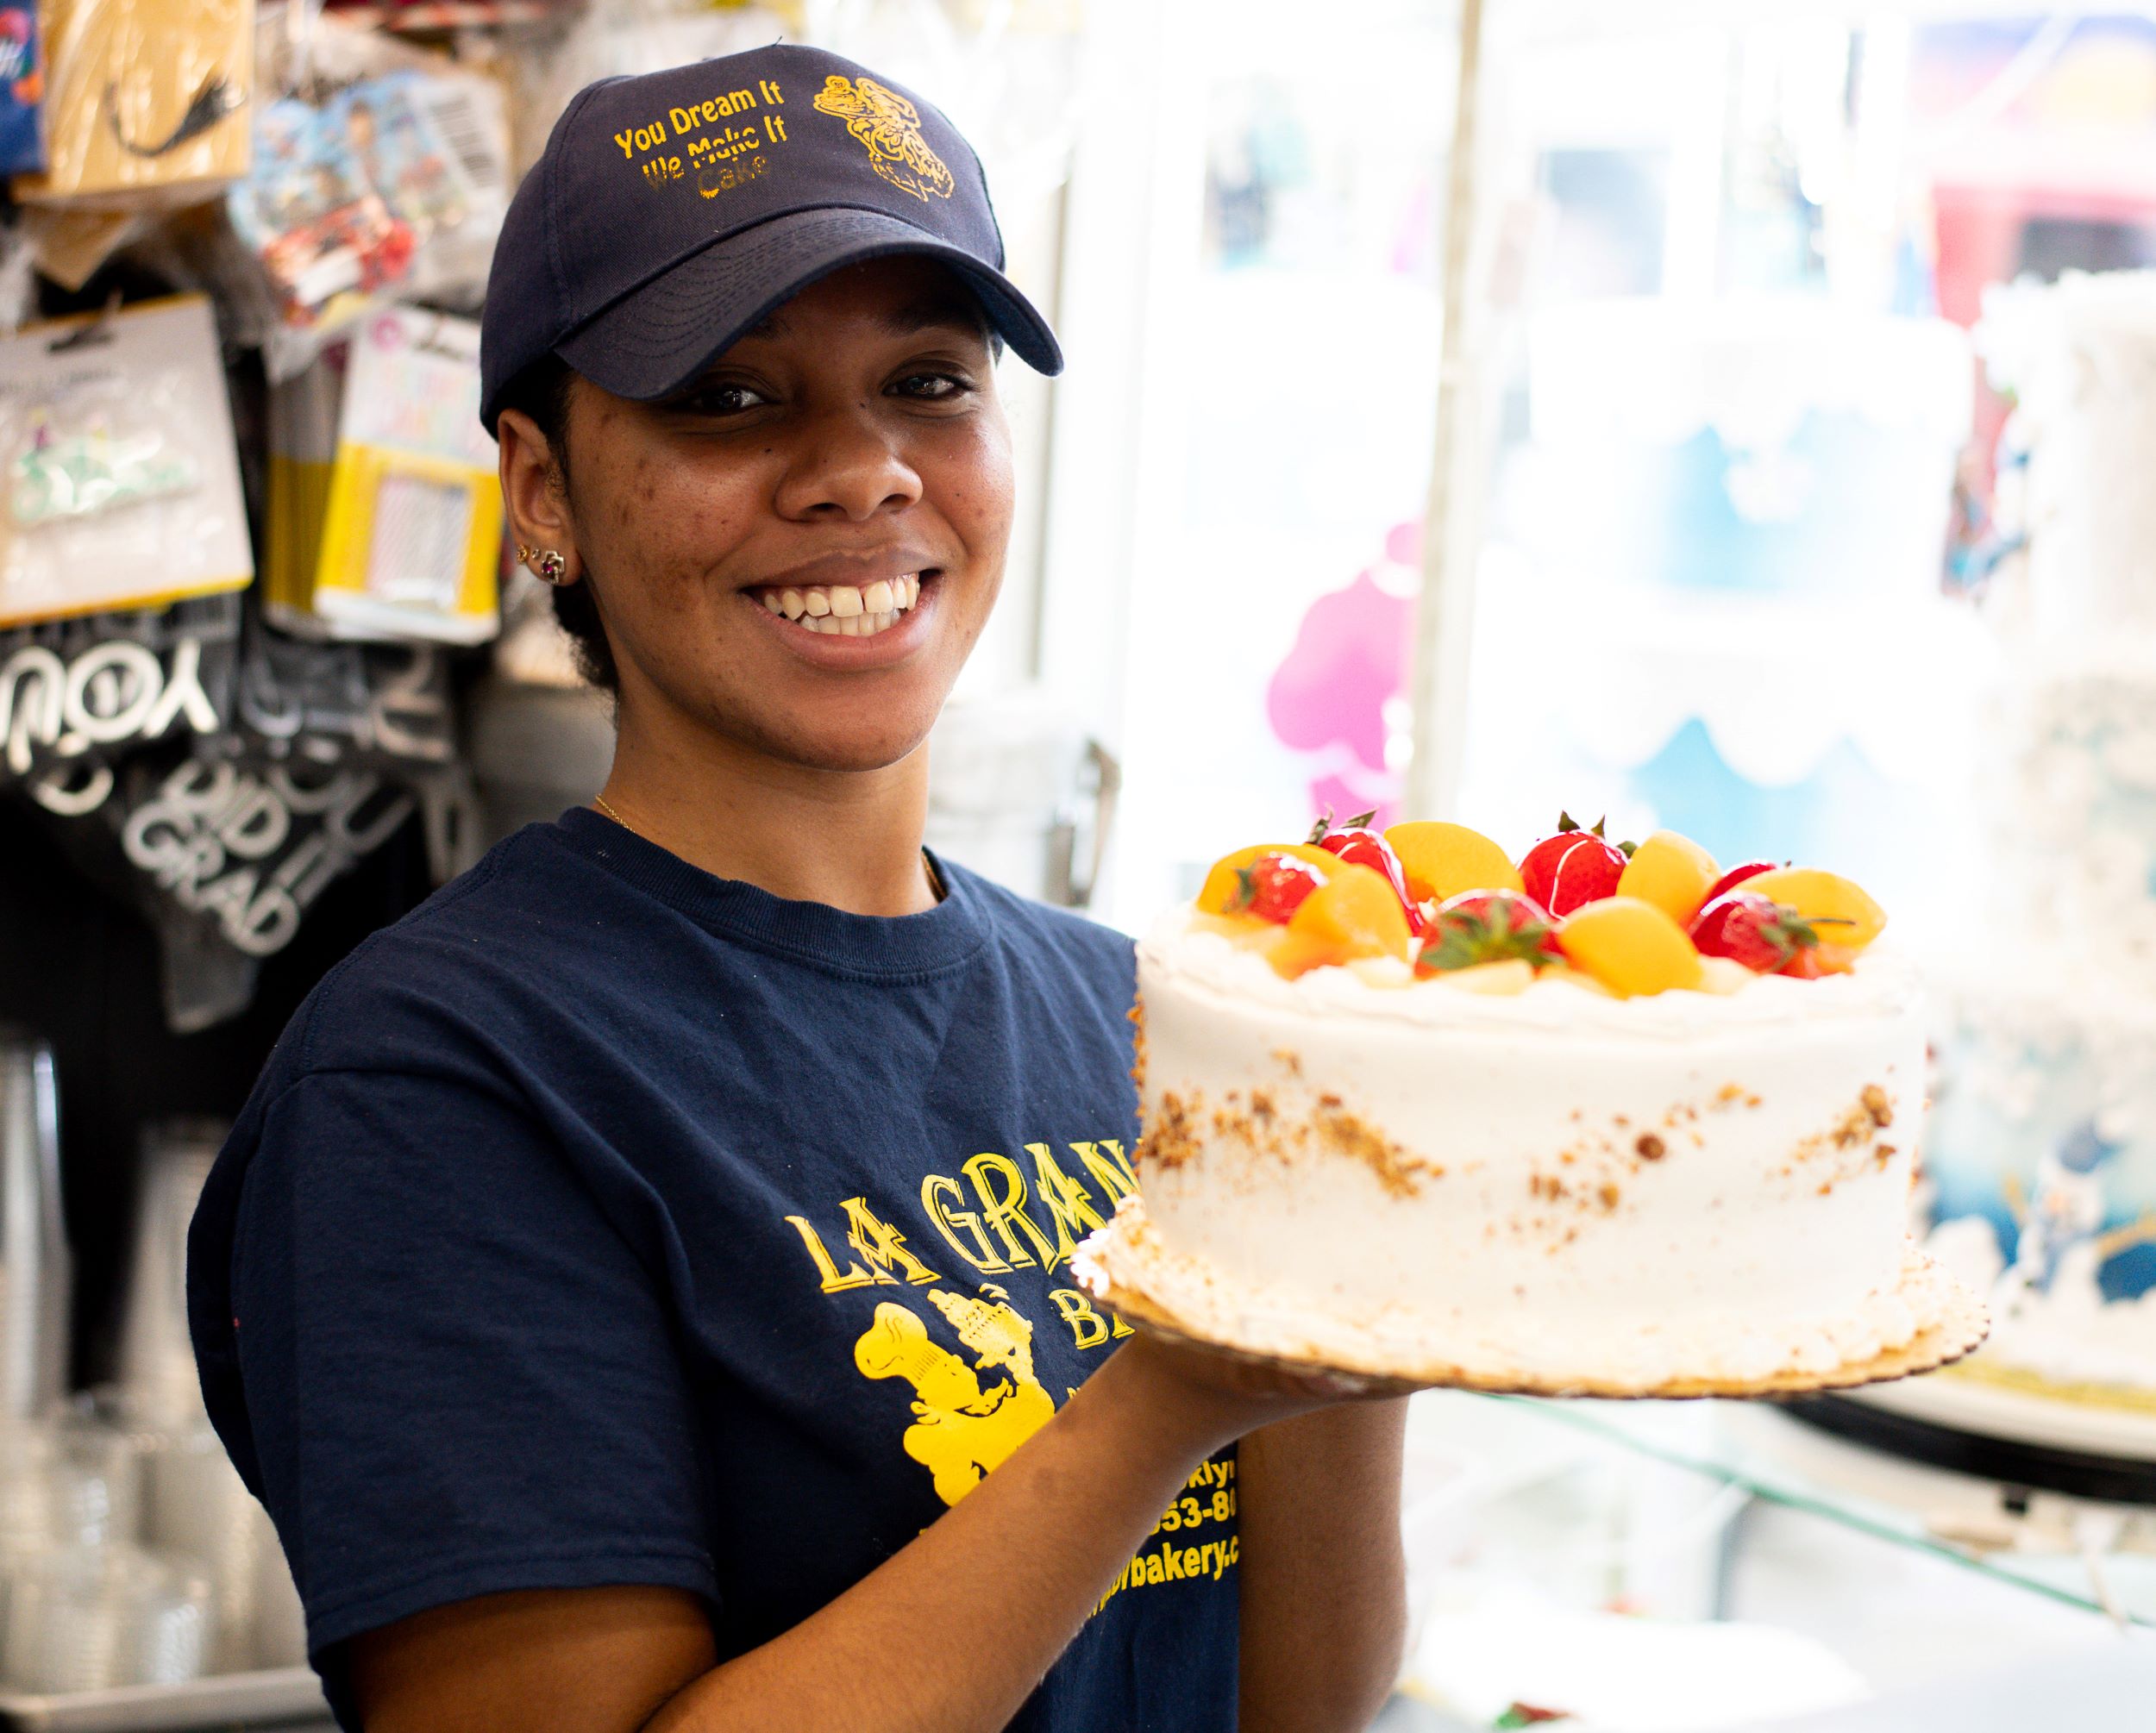 A cheerful bakery employee in a navy cap and t-shirt, presenting a large, beautifully decorated cake with fruit toppings at a colorful dessert shop.